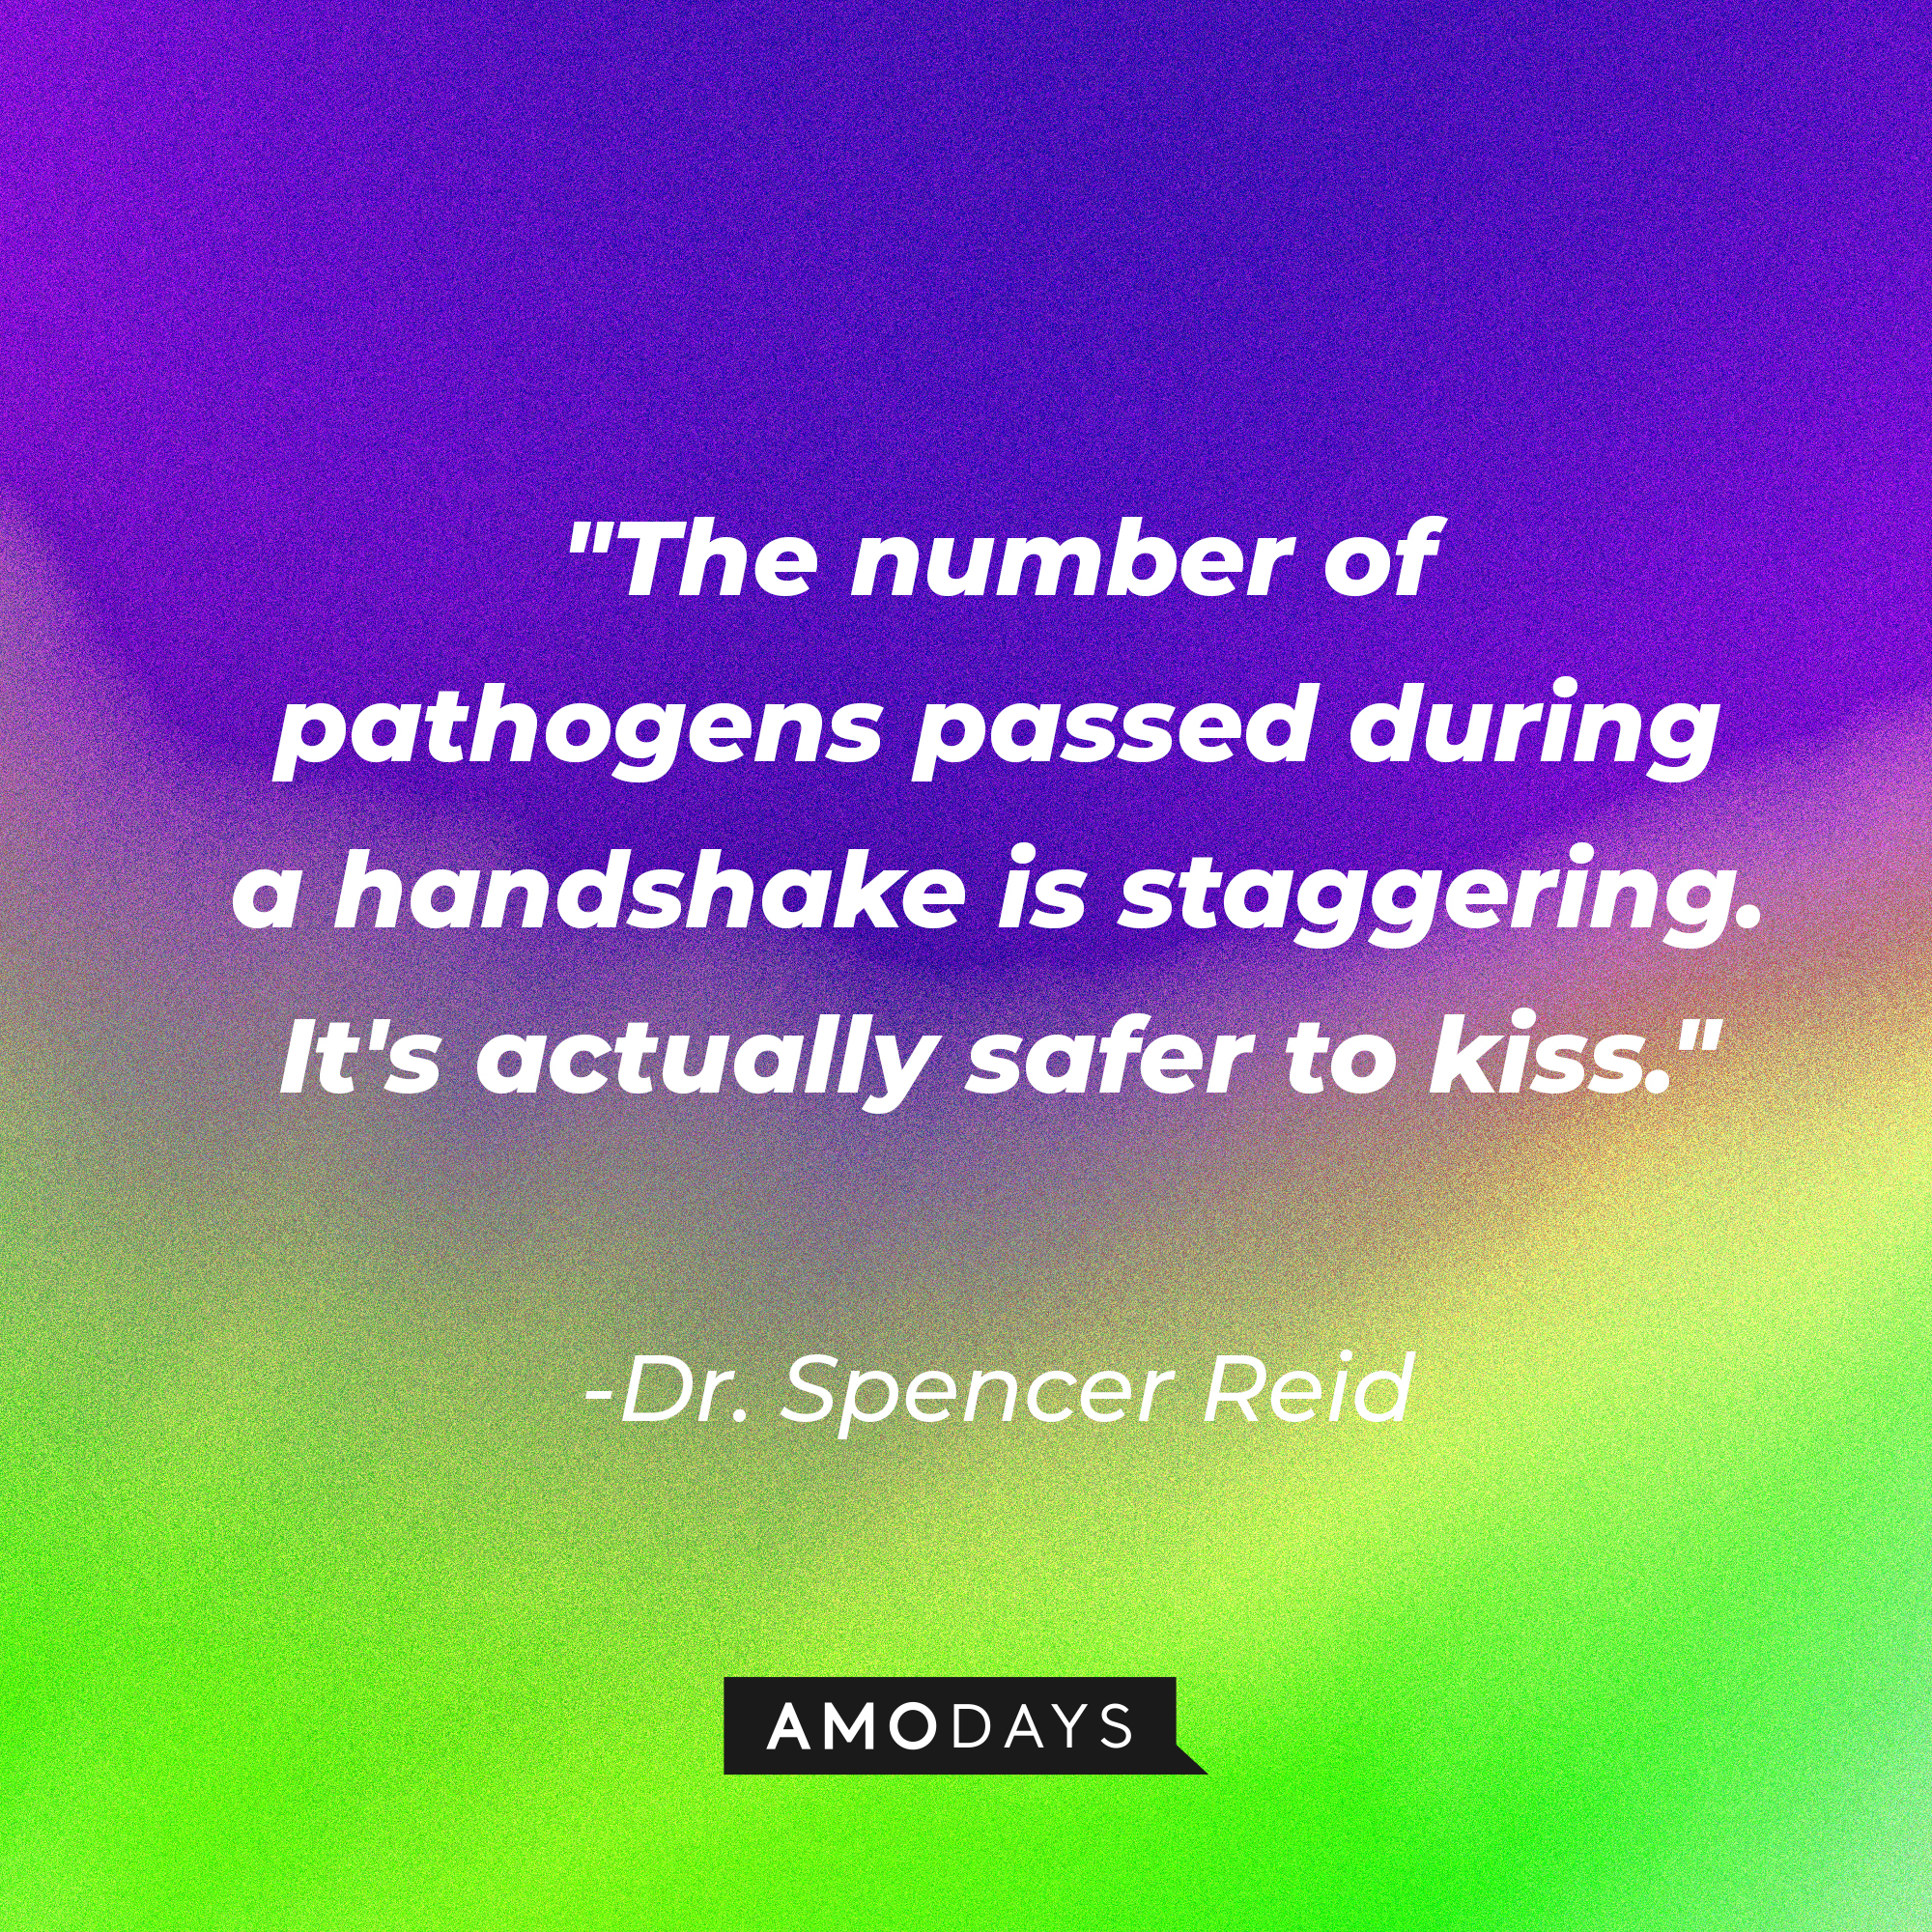 Dr. Spencer Reid's quote: "The number of pathogens passed during a handshake is staggering. It's actually safer to kiss." | Source: AmoDays